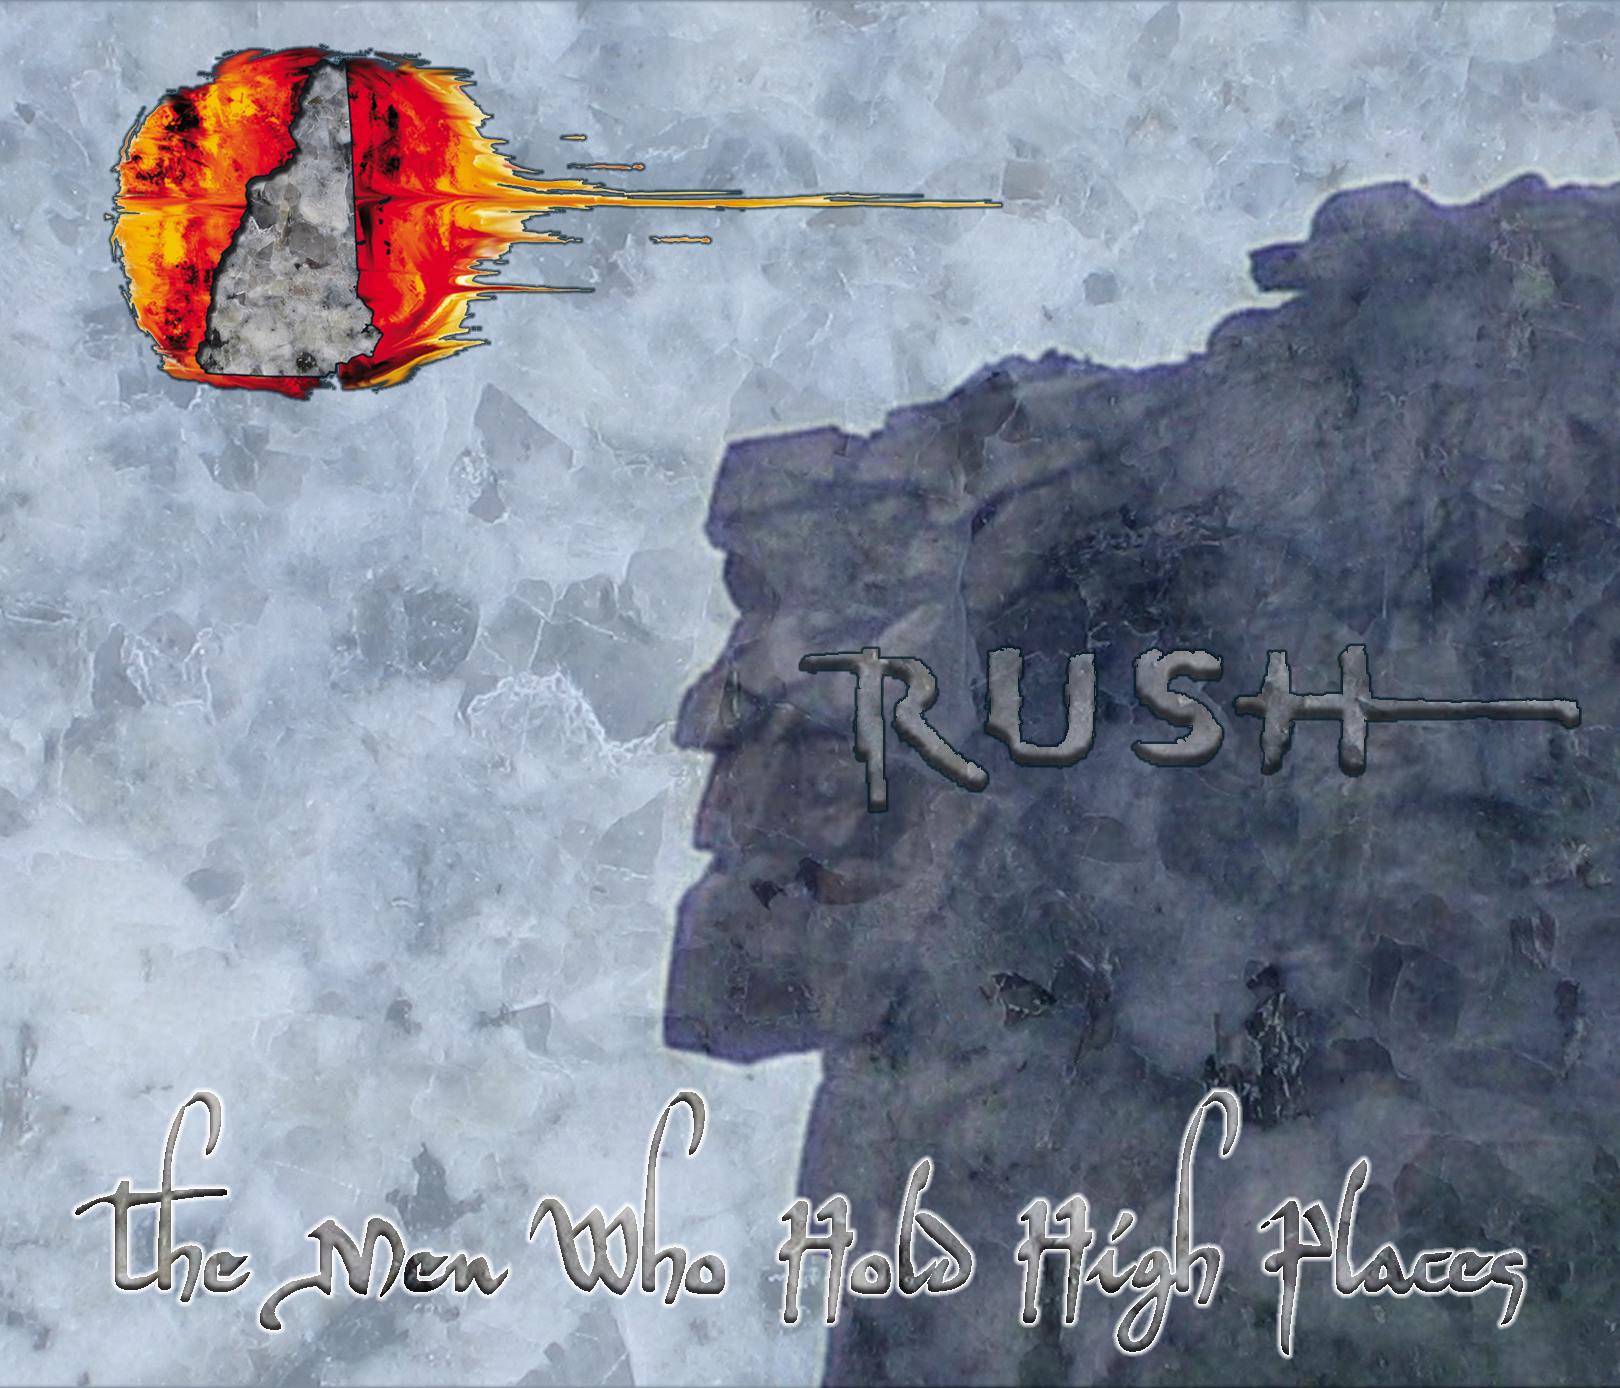 Rush - The Men Who Hold High Places